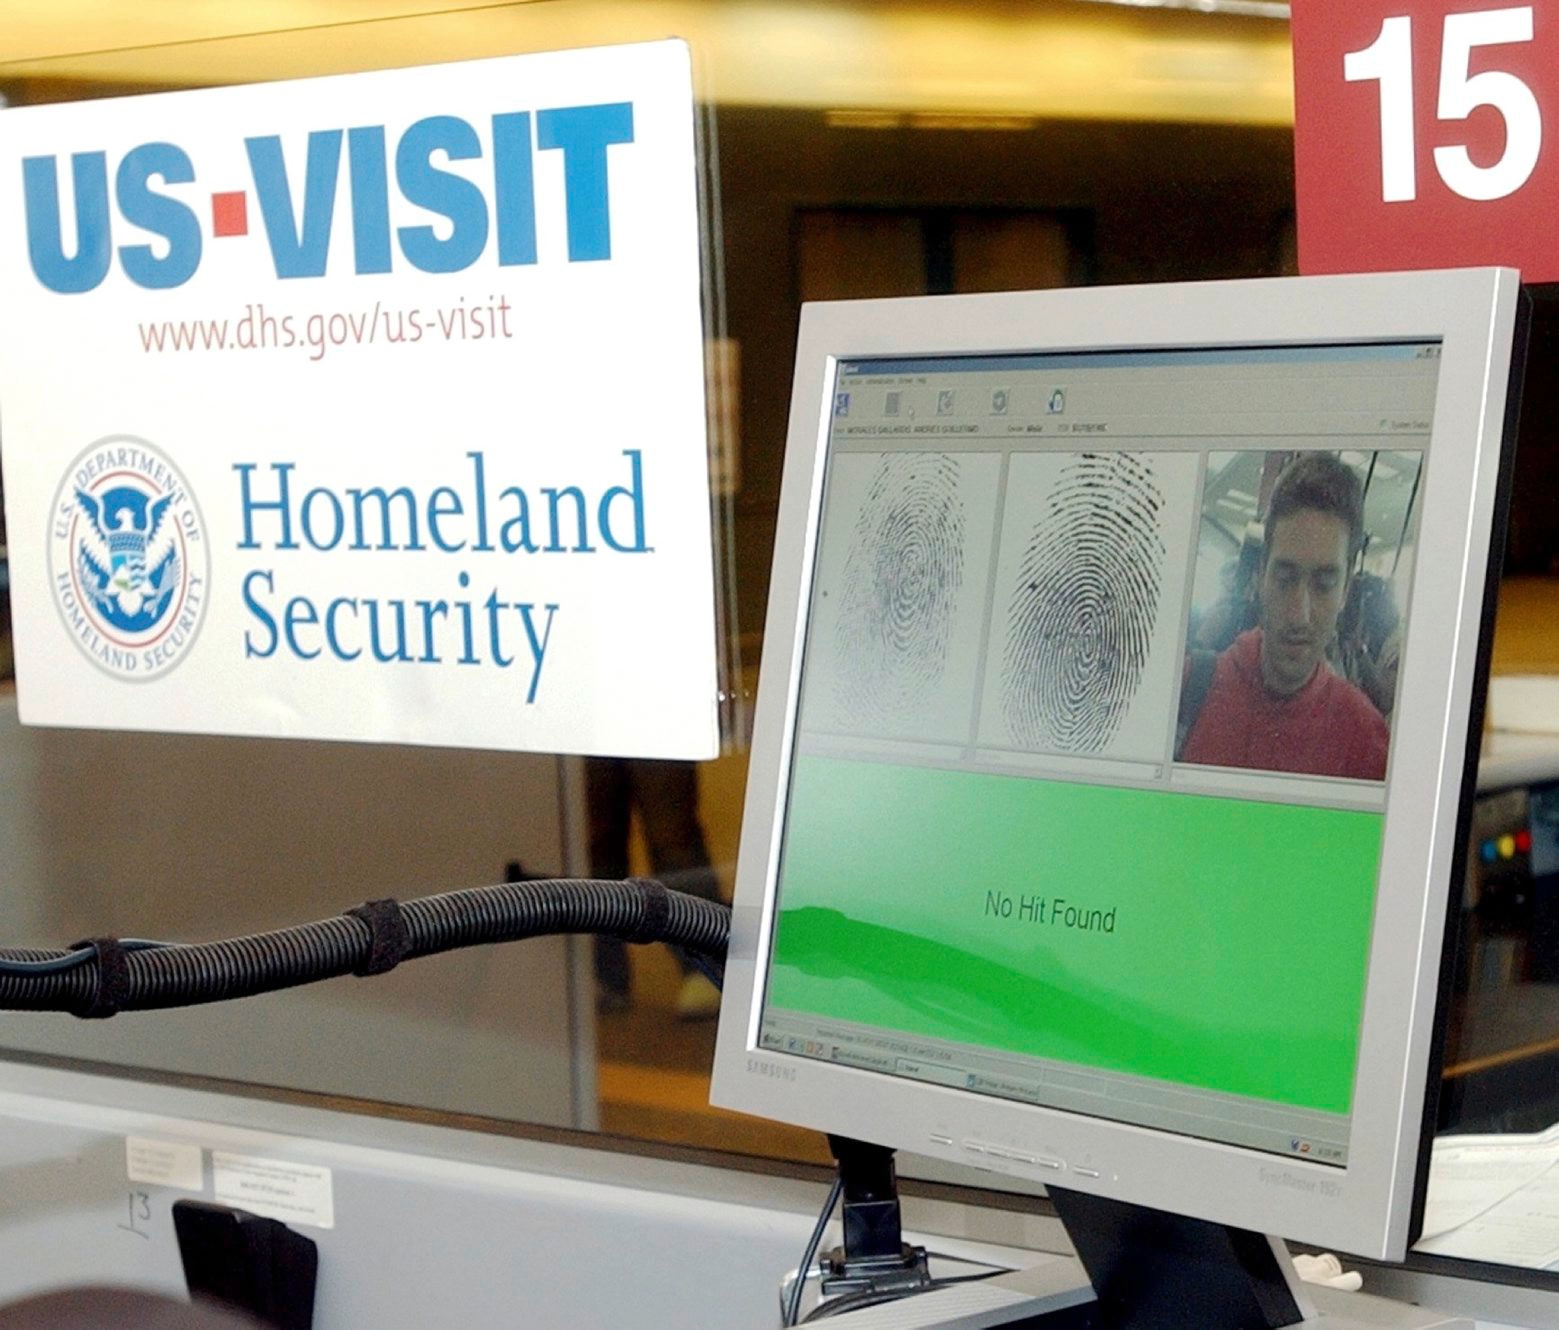 The US-VISIT system shows "No Hit Found" as it displays the fingerprints and photo of engineering student Andres Morales as it cleared him through customs at Hartsfield Jackson International Airport in Atlanta, Monday, Jan. 5, 2004 using the US-VISIT system. His fingerprints and photo are displayed on the monitor. The system then checks him through a database. He arrived on a Delta flight from Santiago. (KEYSTONE/AP Photo/Ric Feld) USA AIRPORT SECURITY